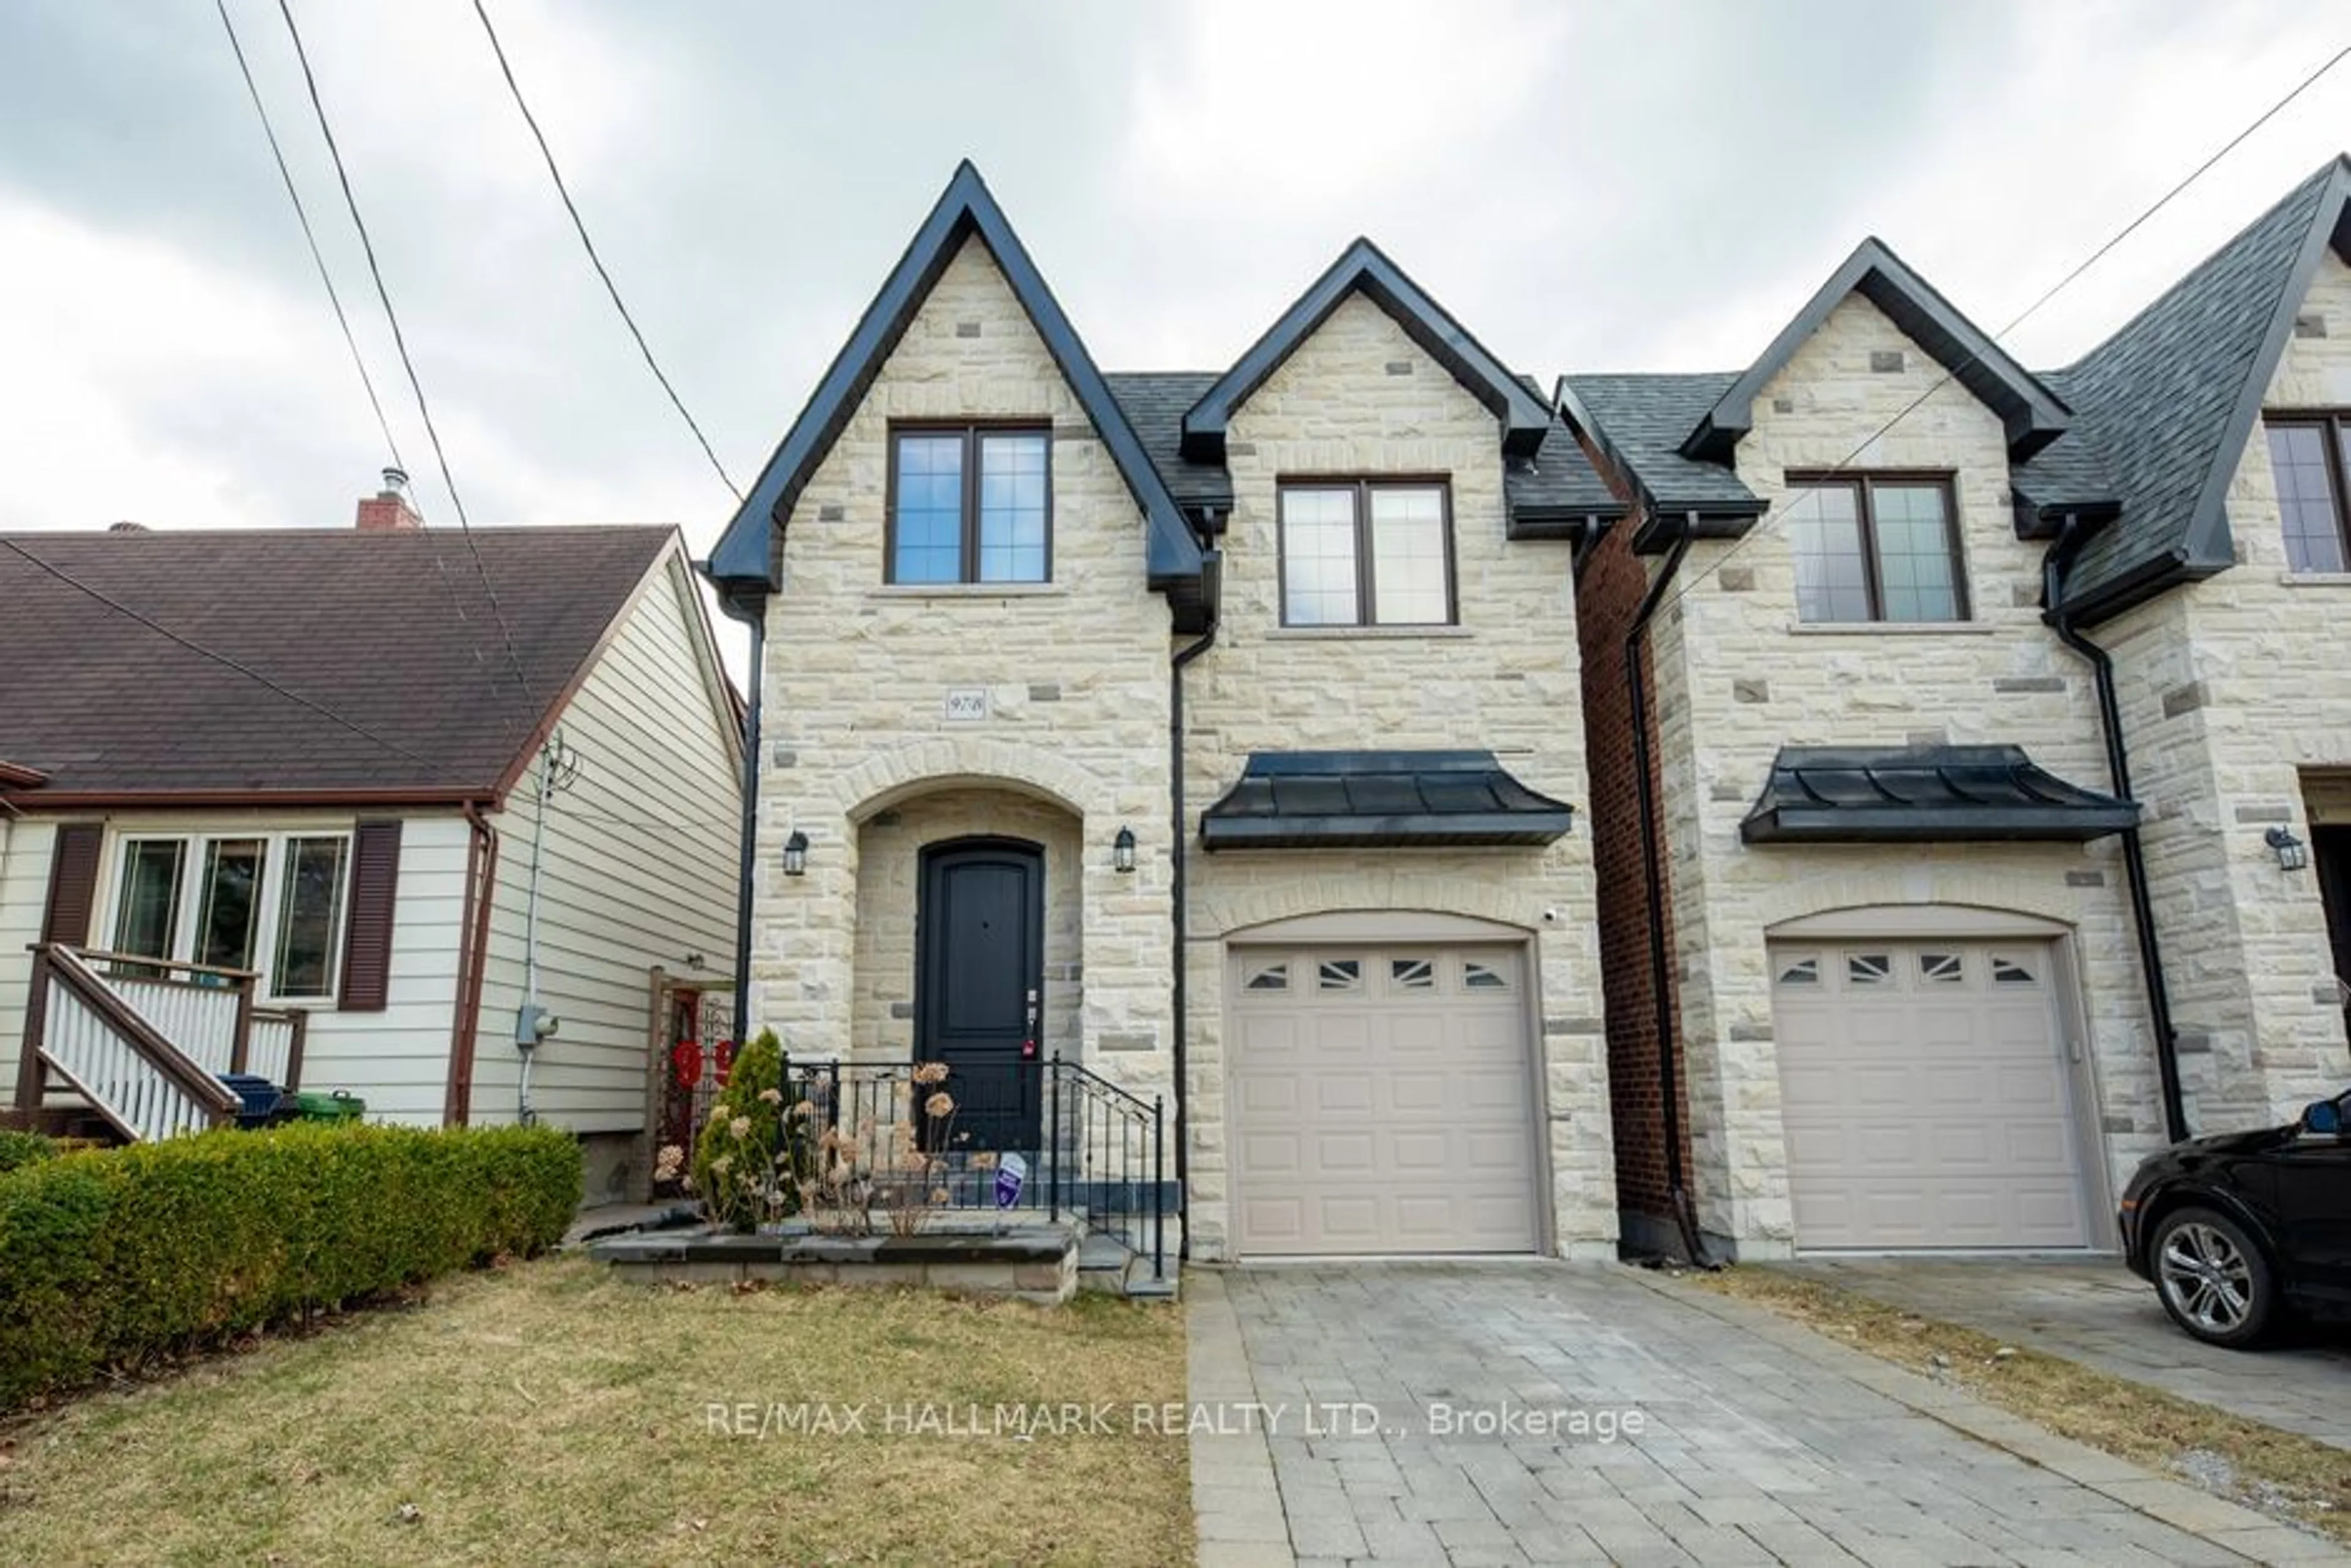 Frontside or backside of a home for 97B Craiglee Dr, Toronto Ontario M1N 2M8